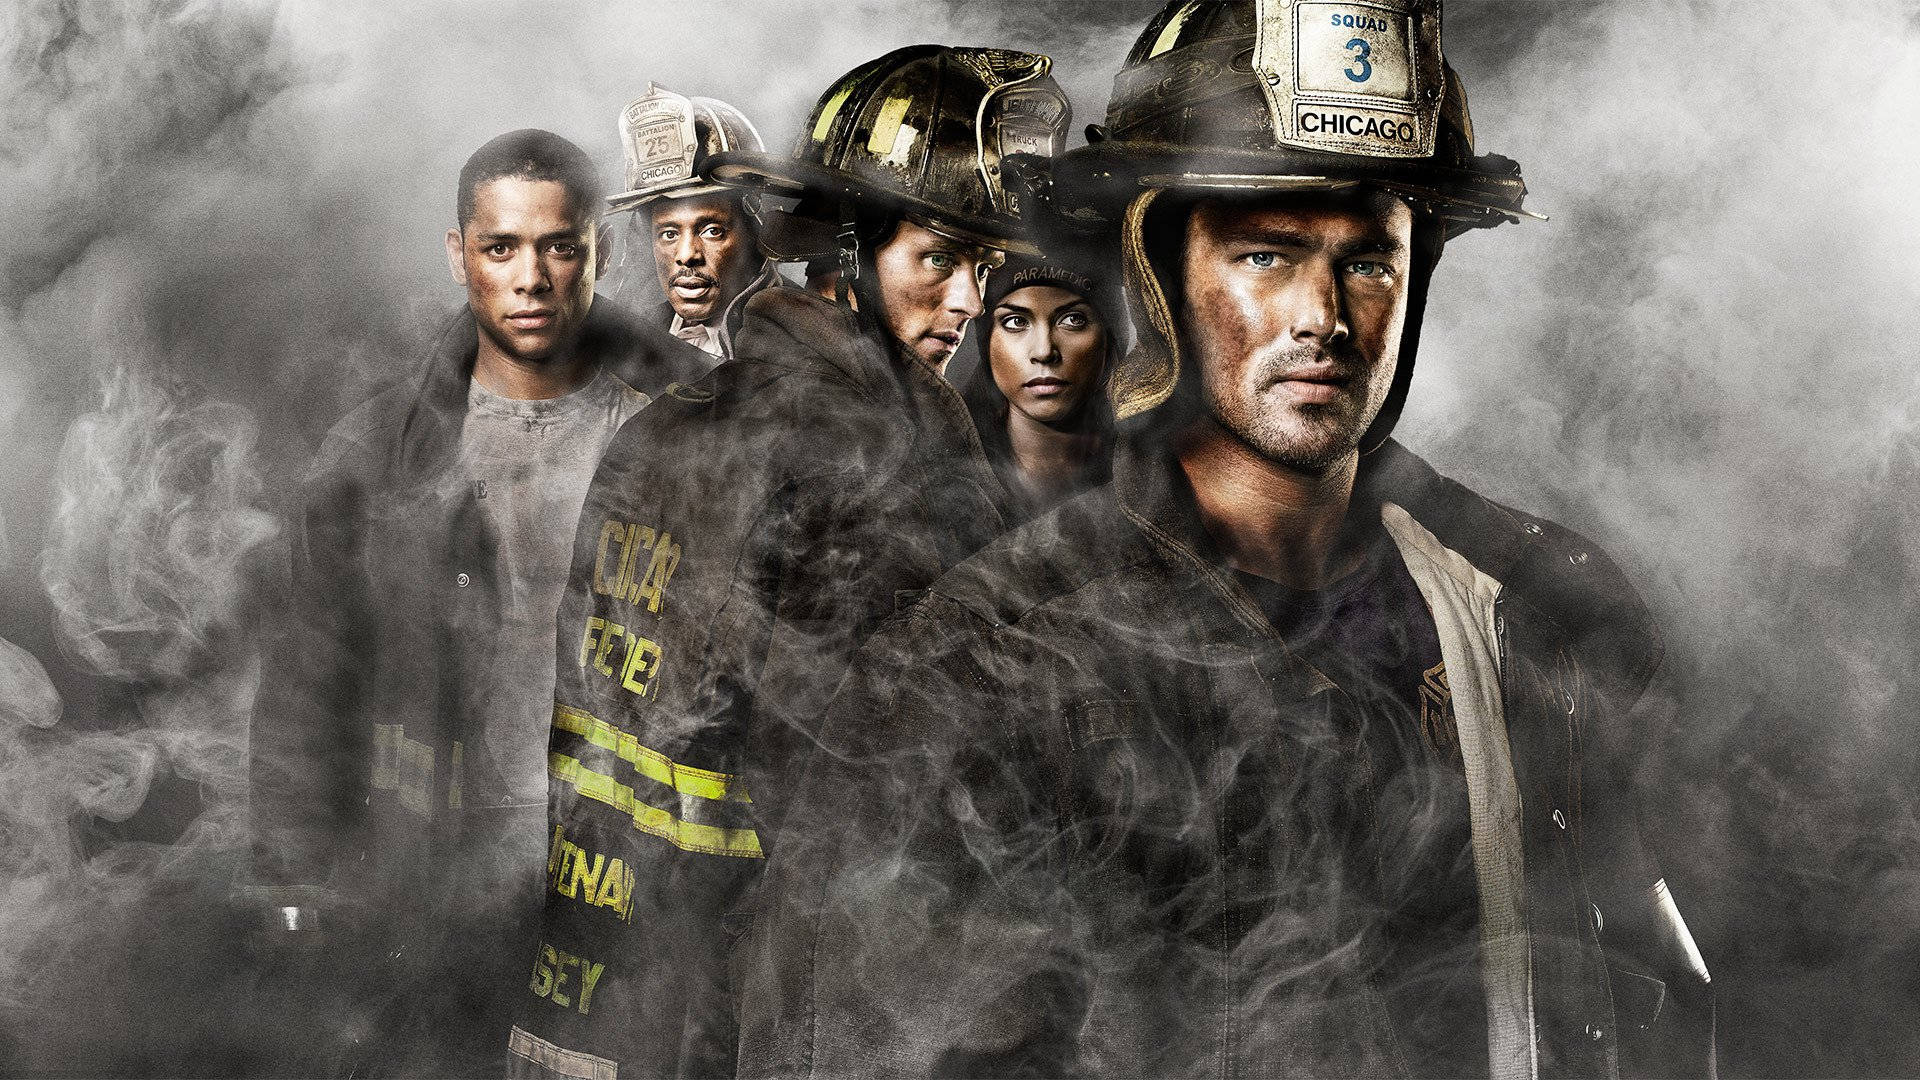 American Actor Taylor Kinney As A Fireman In Chicago Fire Wallpaper